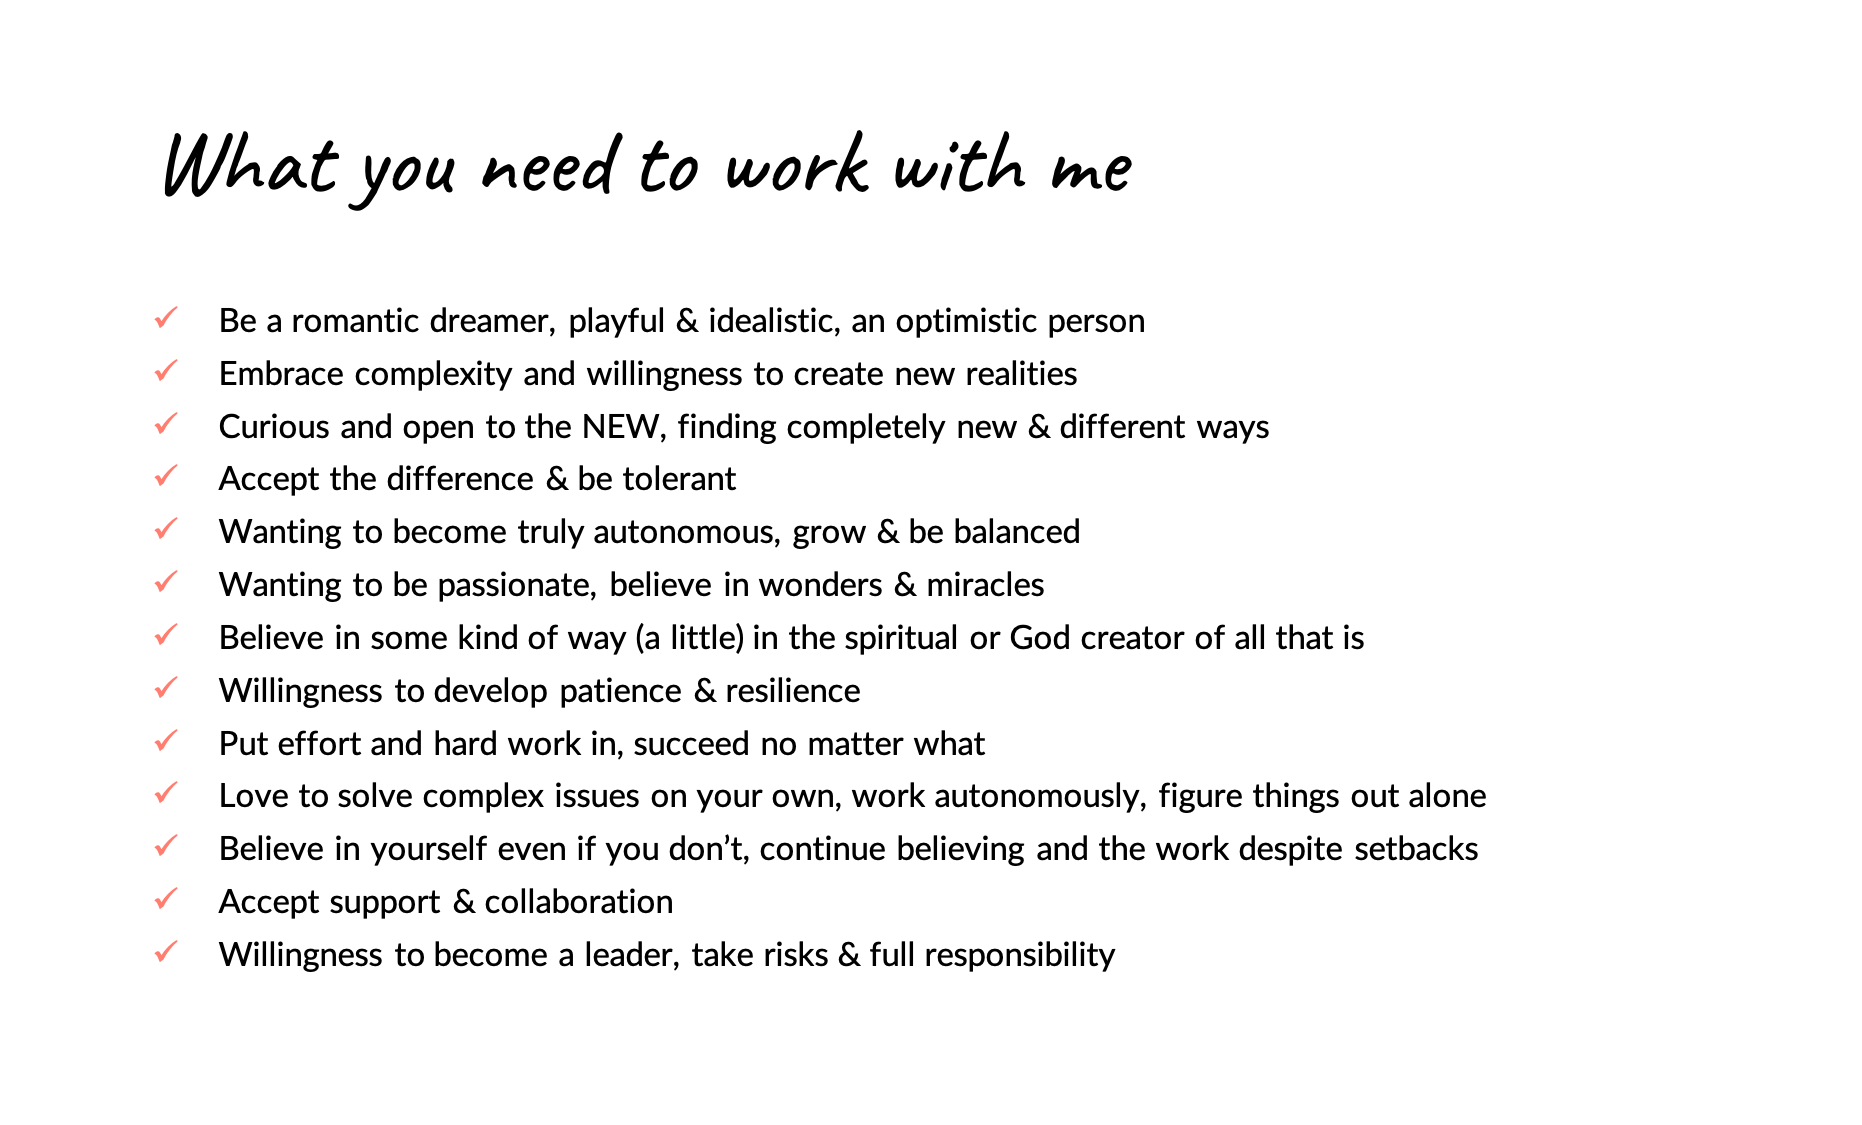 What you need when working with me_SUBSTANCEMIND